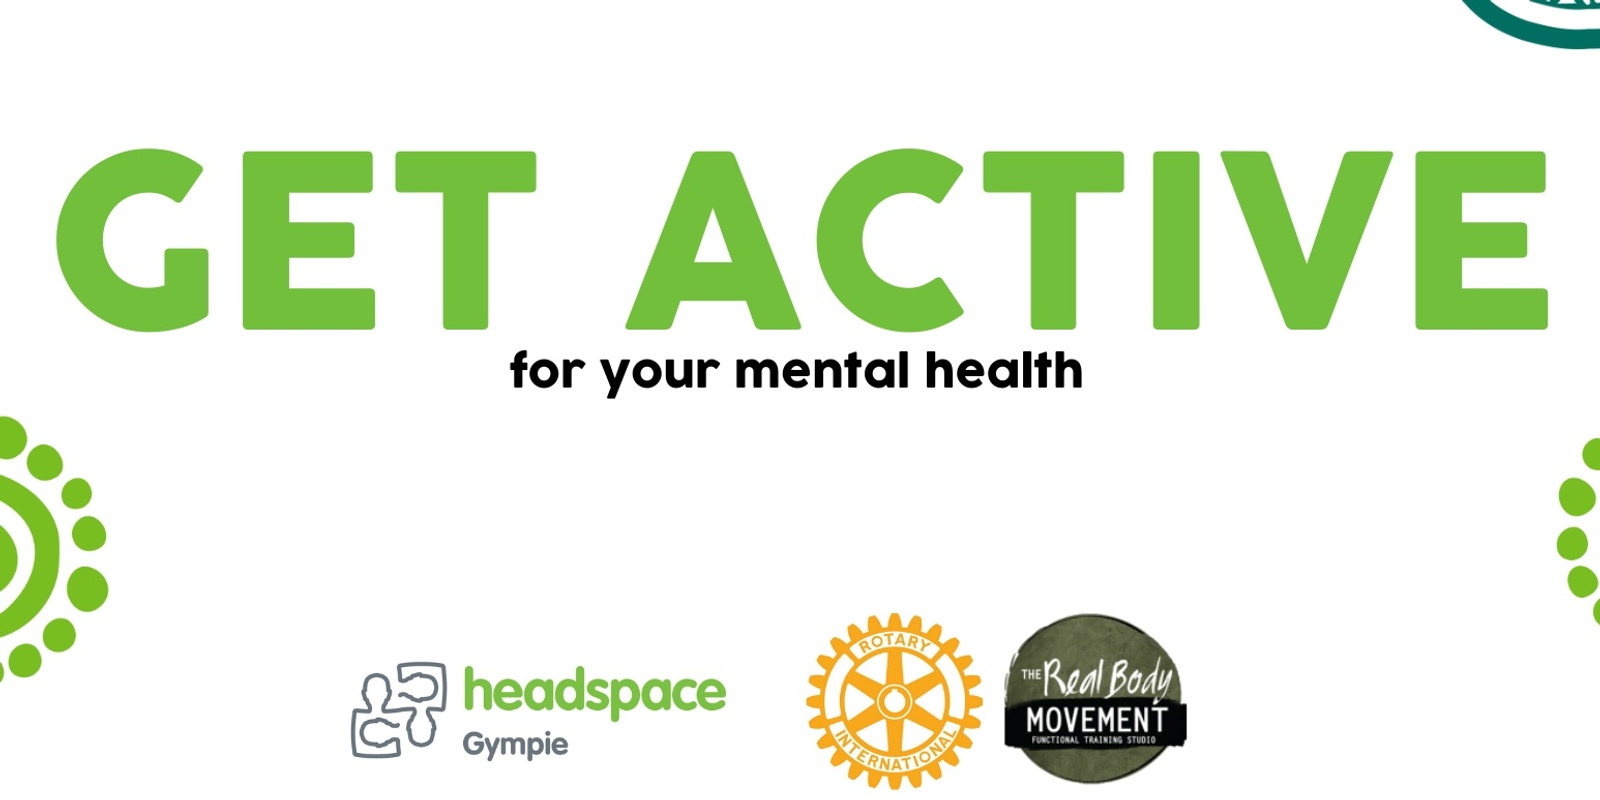 Banner image for GET ACTIVE with Rotary, real body movement and headspace Gympie 